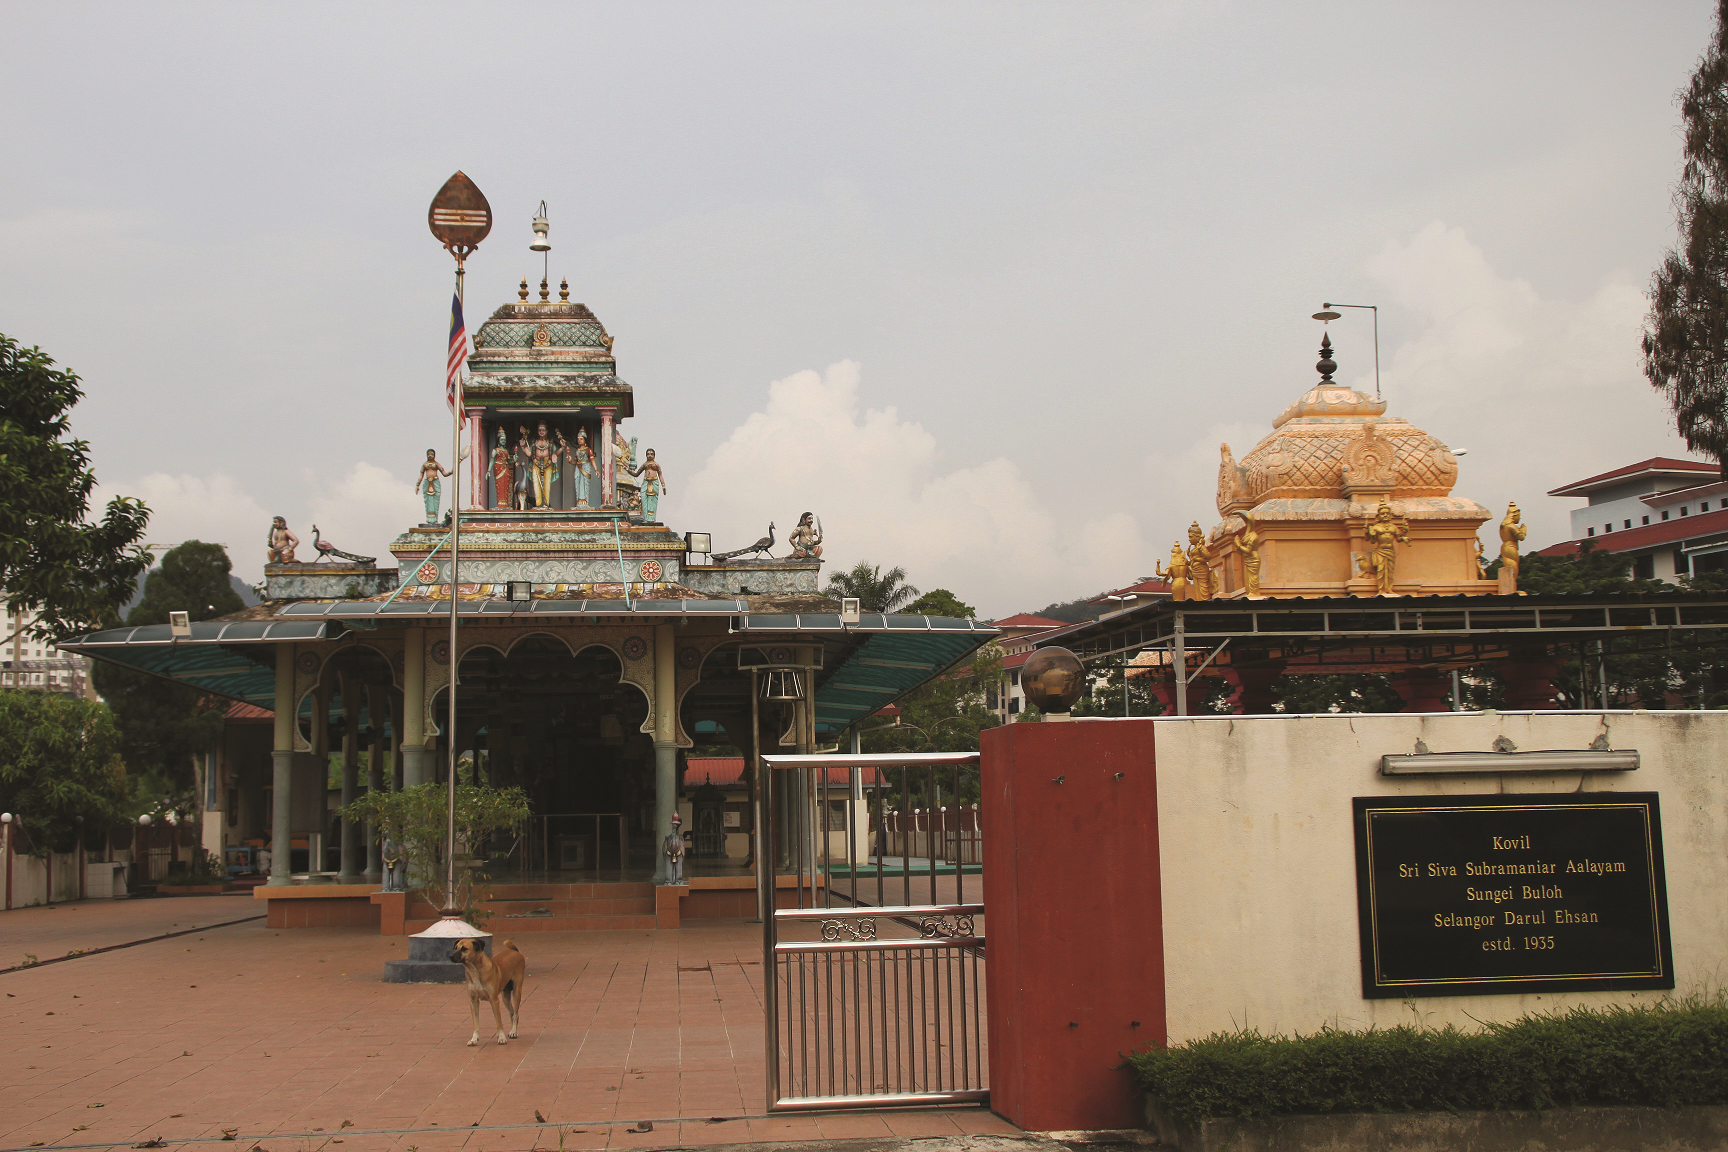 Hindu Temple at the East Section. (photo by Tan Ean Nee)